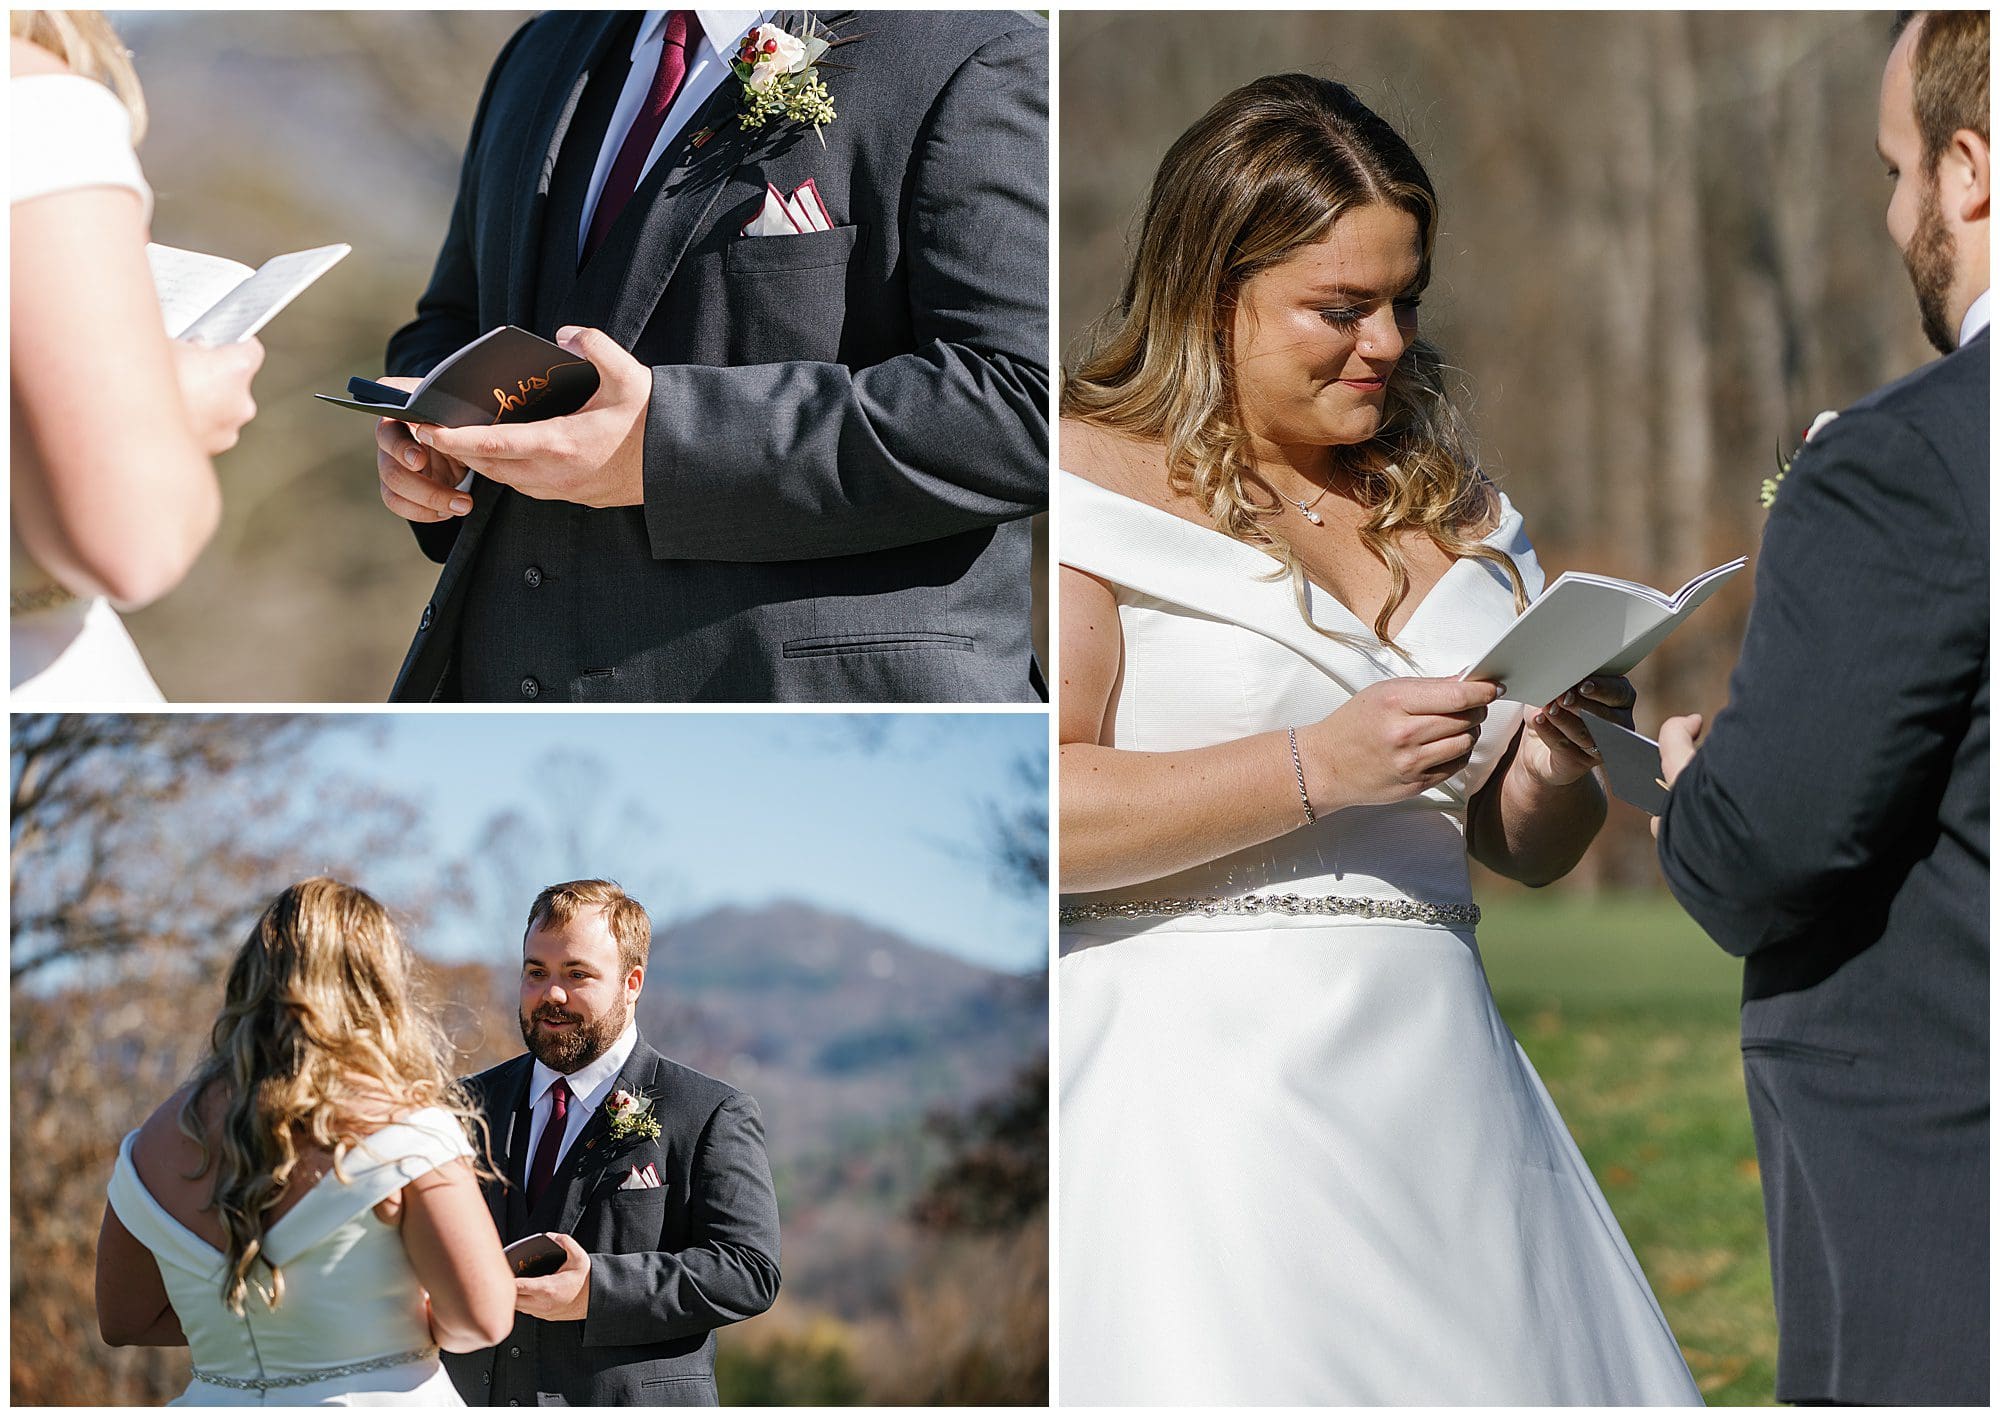 A bride and groom reading their wedding vows.